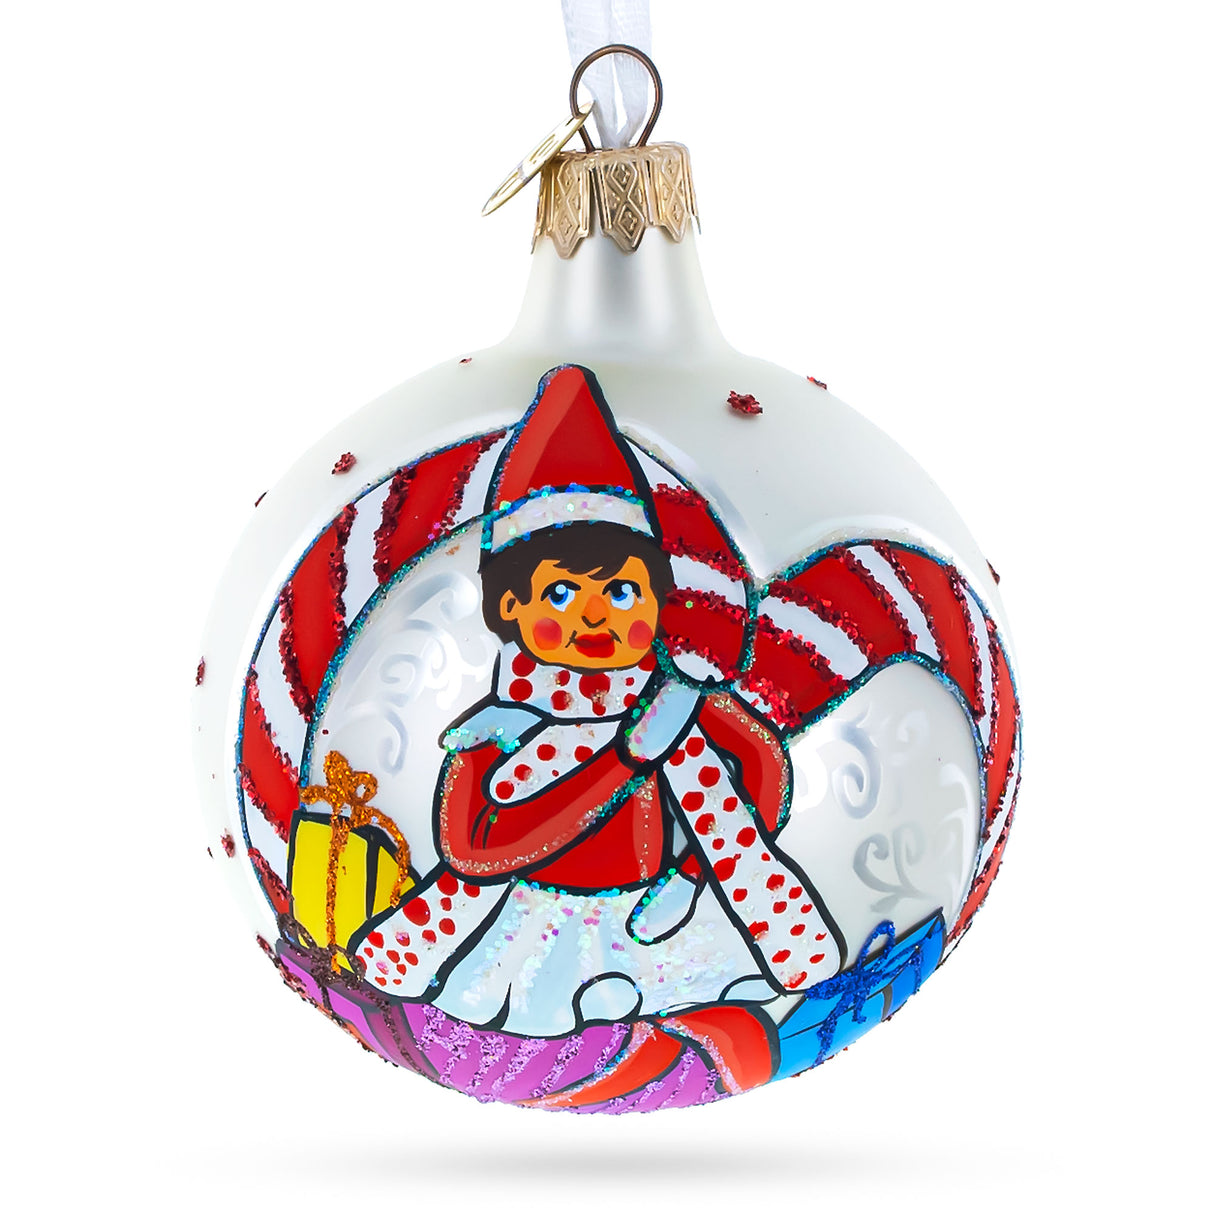 Elfin Delights: Elf and Candy Canes Blown Glass Ball Christmas Ornaments 3.25 Inches in Multi color, Round shape